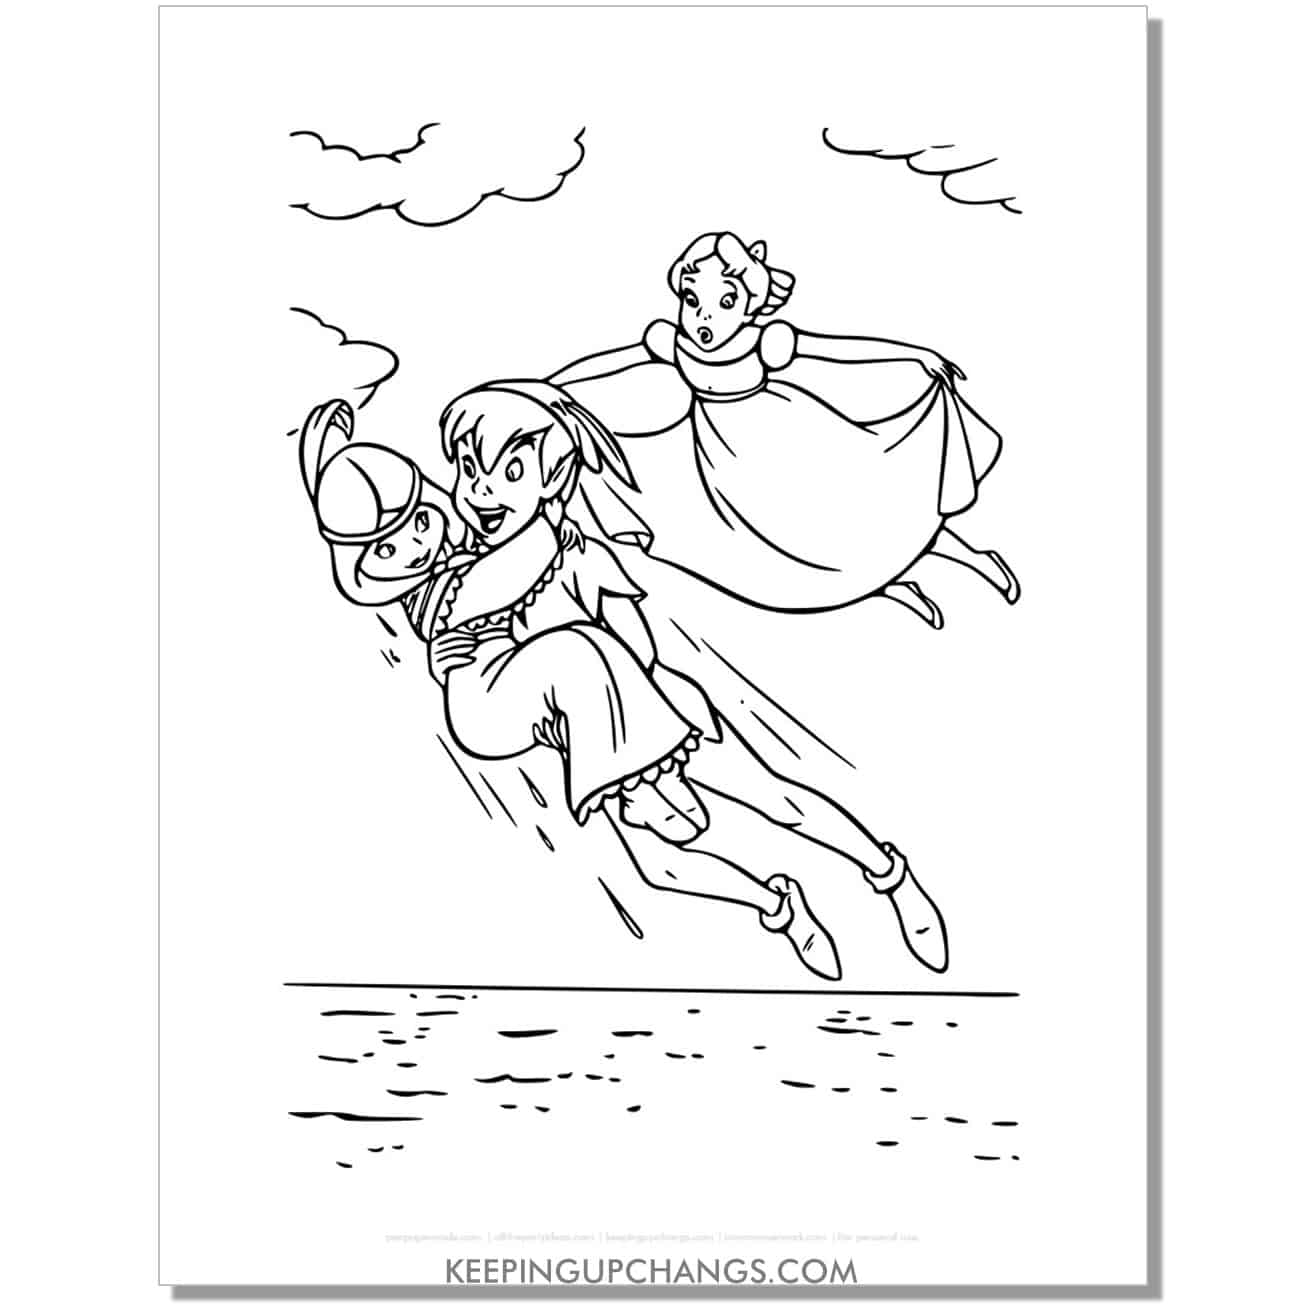 peter pan and wendy darling save tiger lily coloring page, sheet.